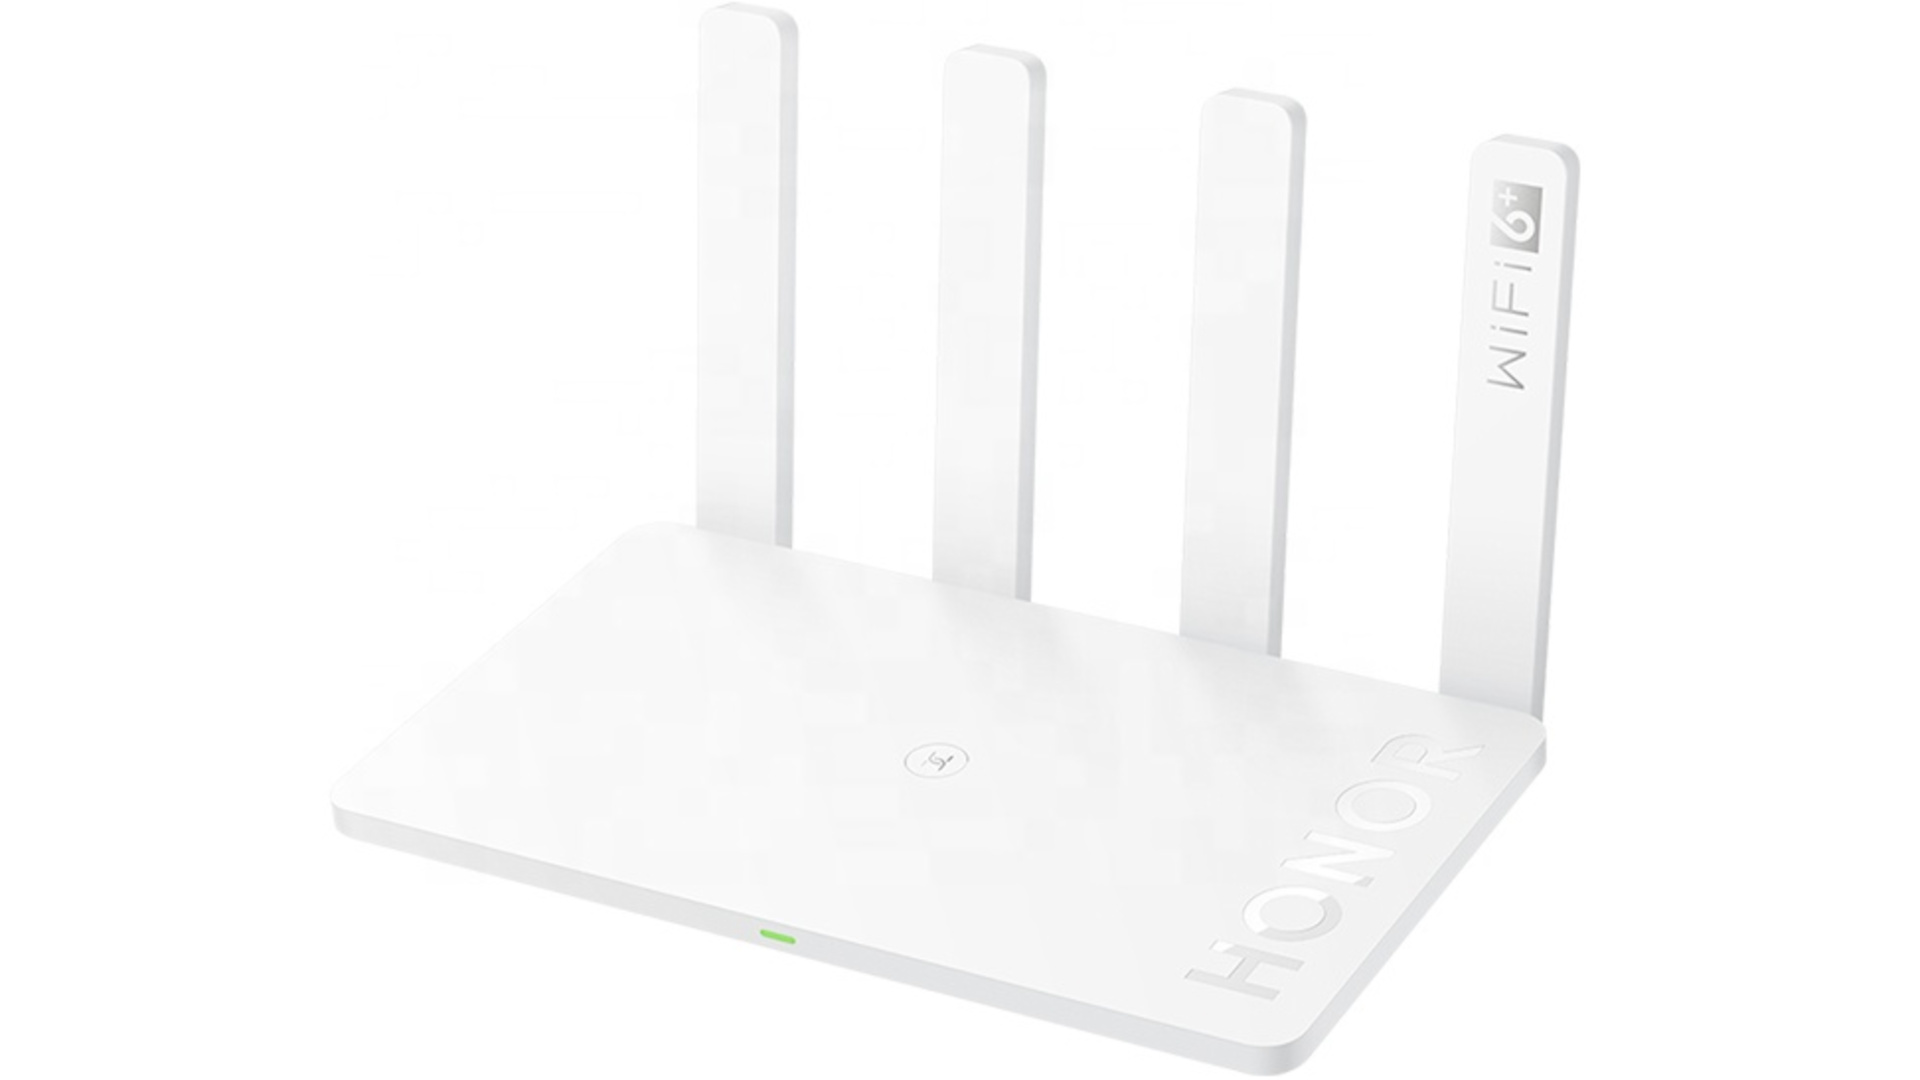 HONOR Router 3 5